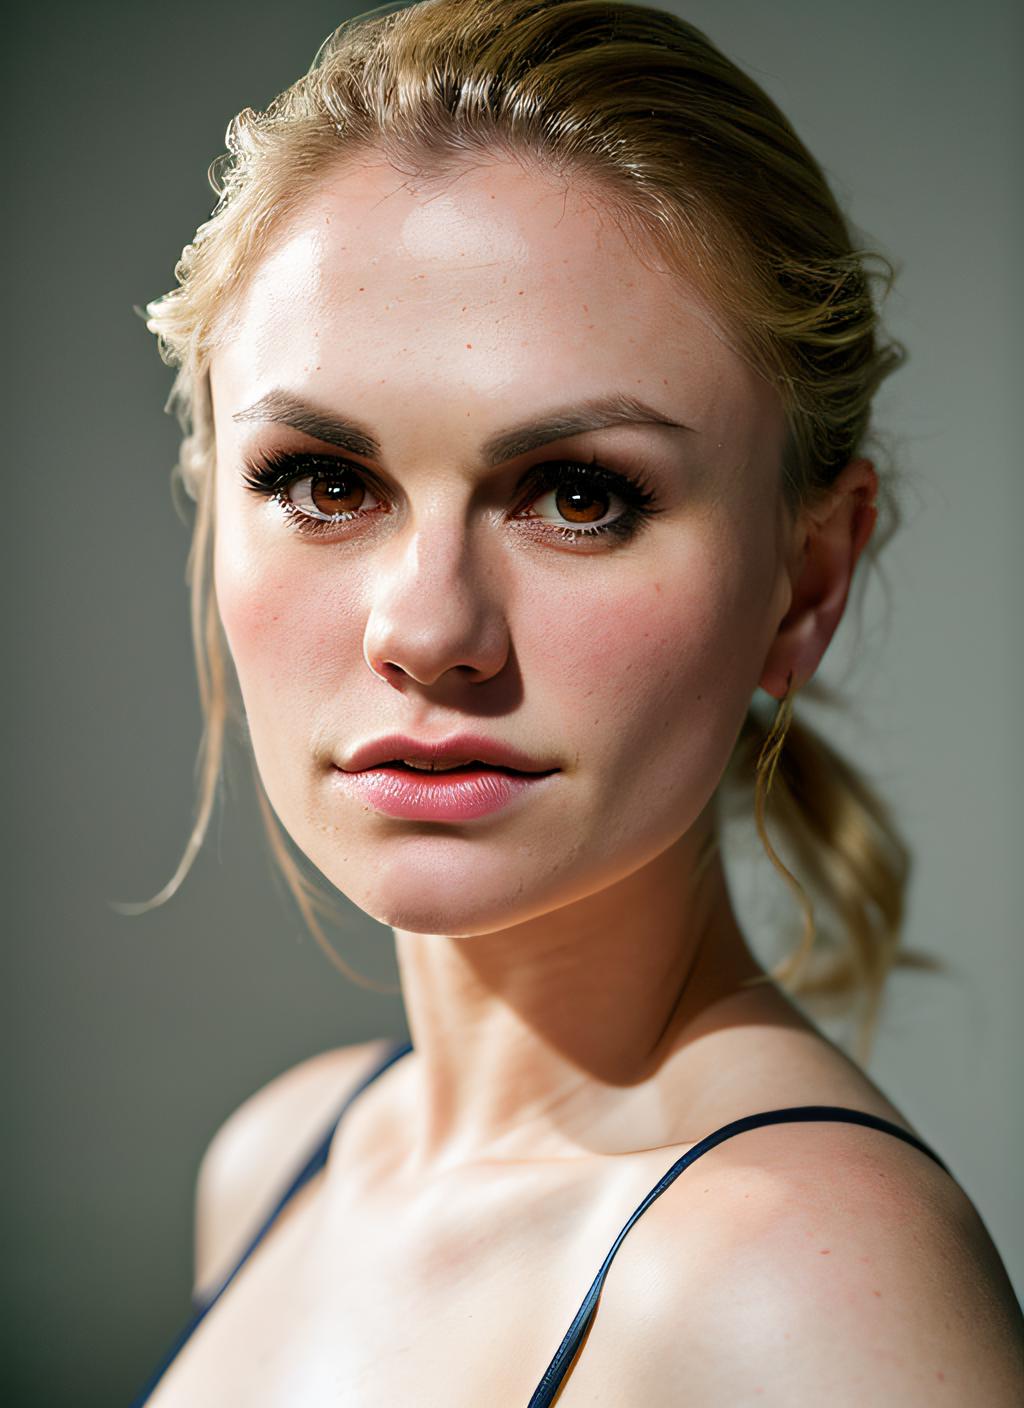 Anna Paquin (Marvel's X-Men's Rogue and Sookie Stackhouse from True Blood TV show) image by astragartist